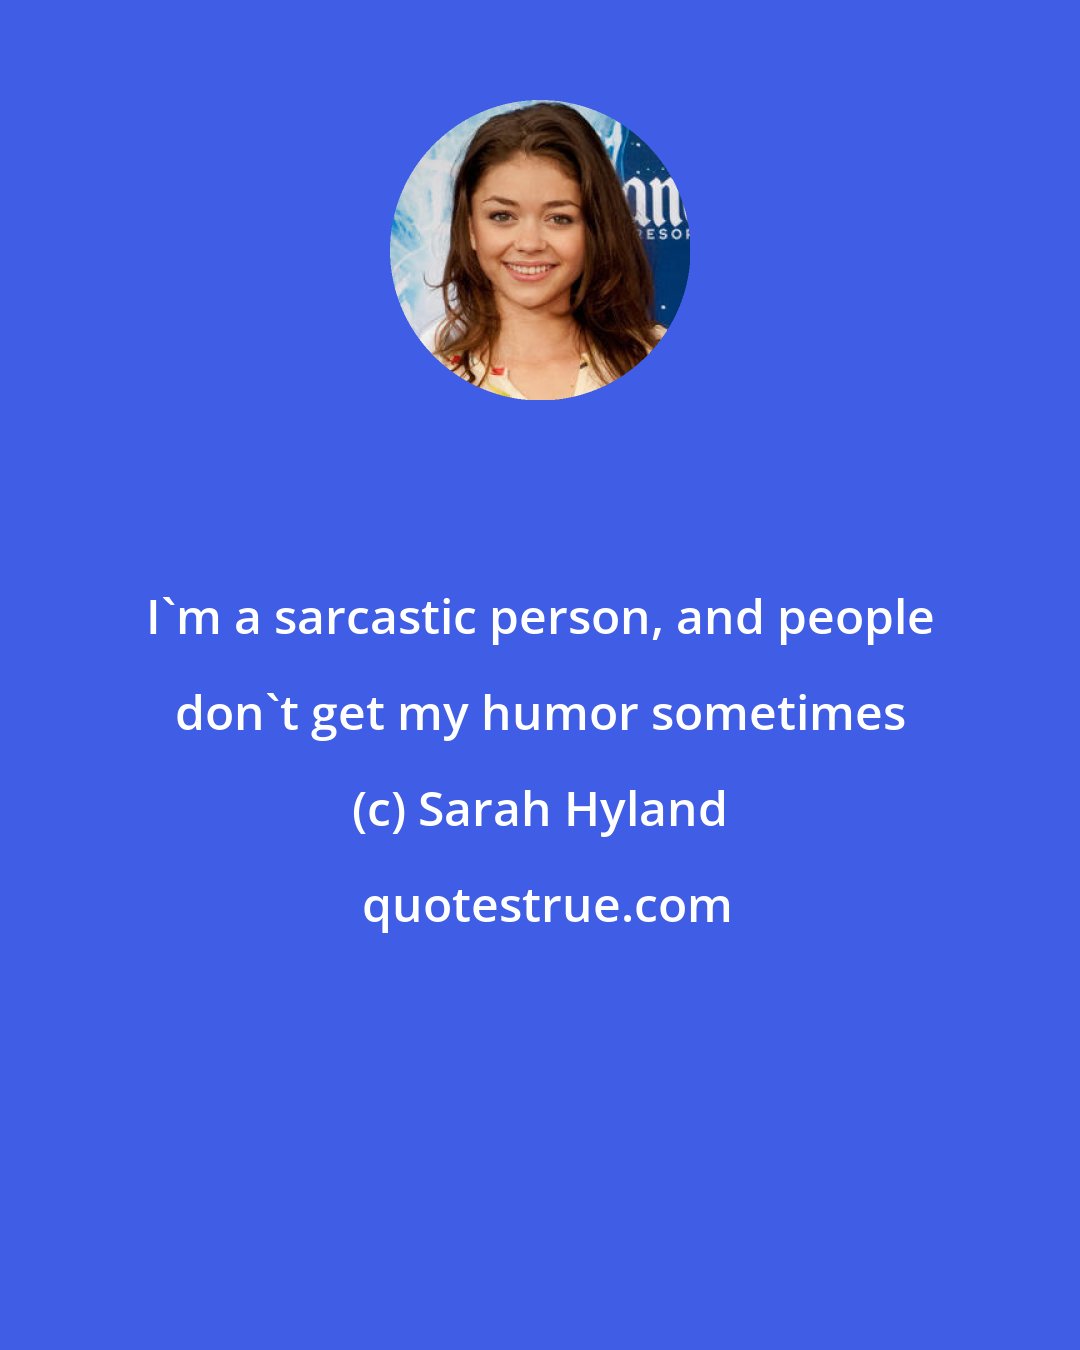 Sarah Hyland: I'm a sarcastic person, and people don't get my humor sometimes